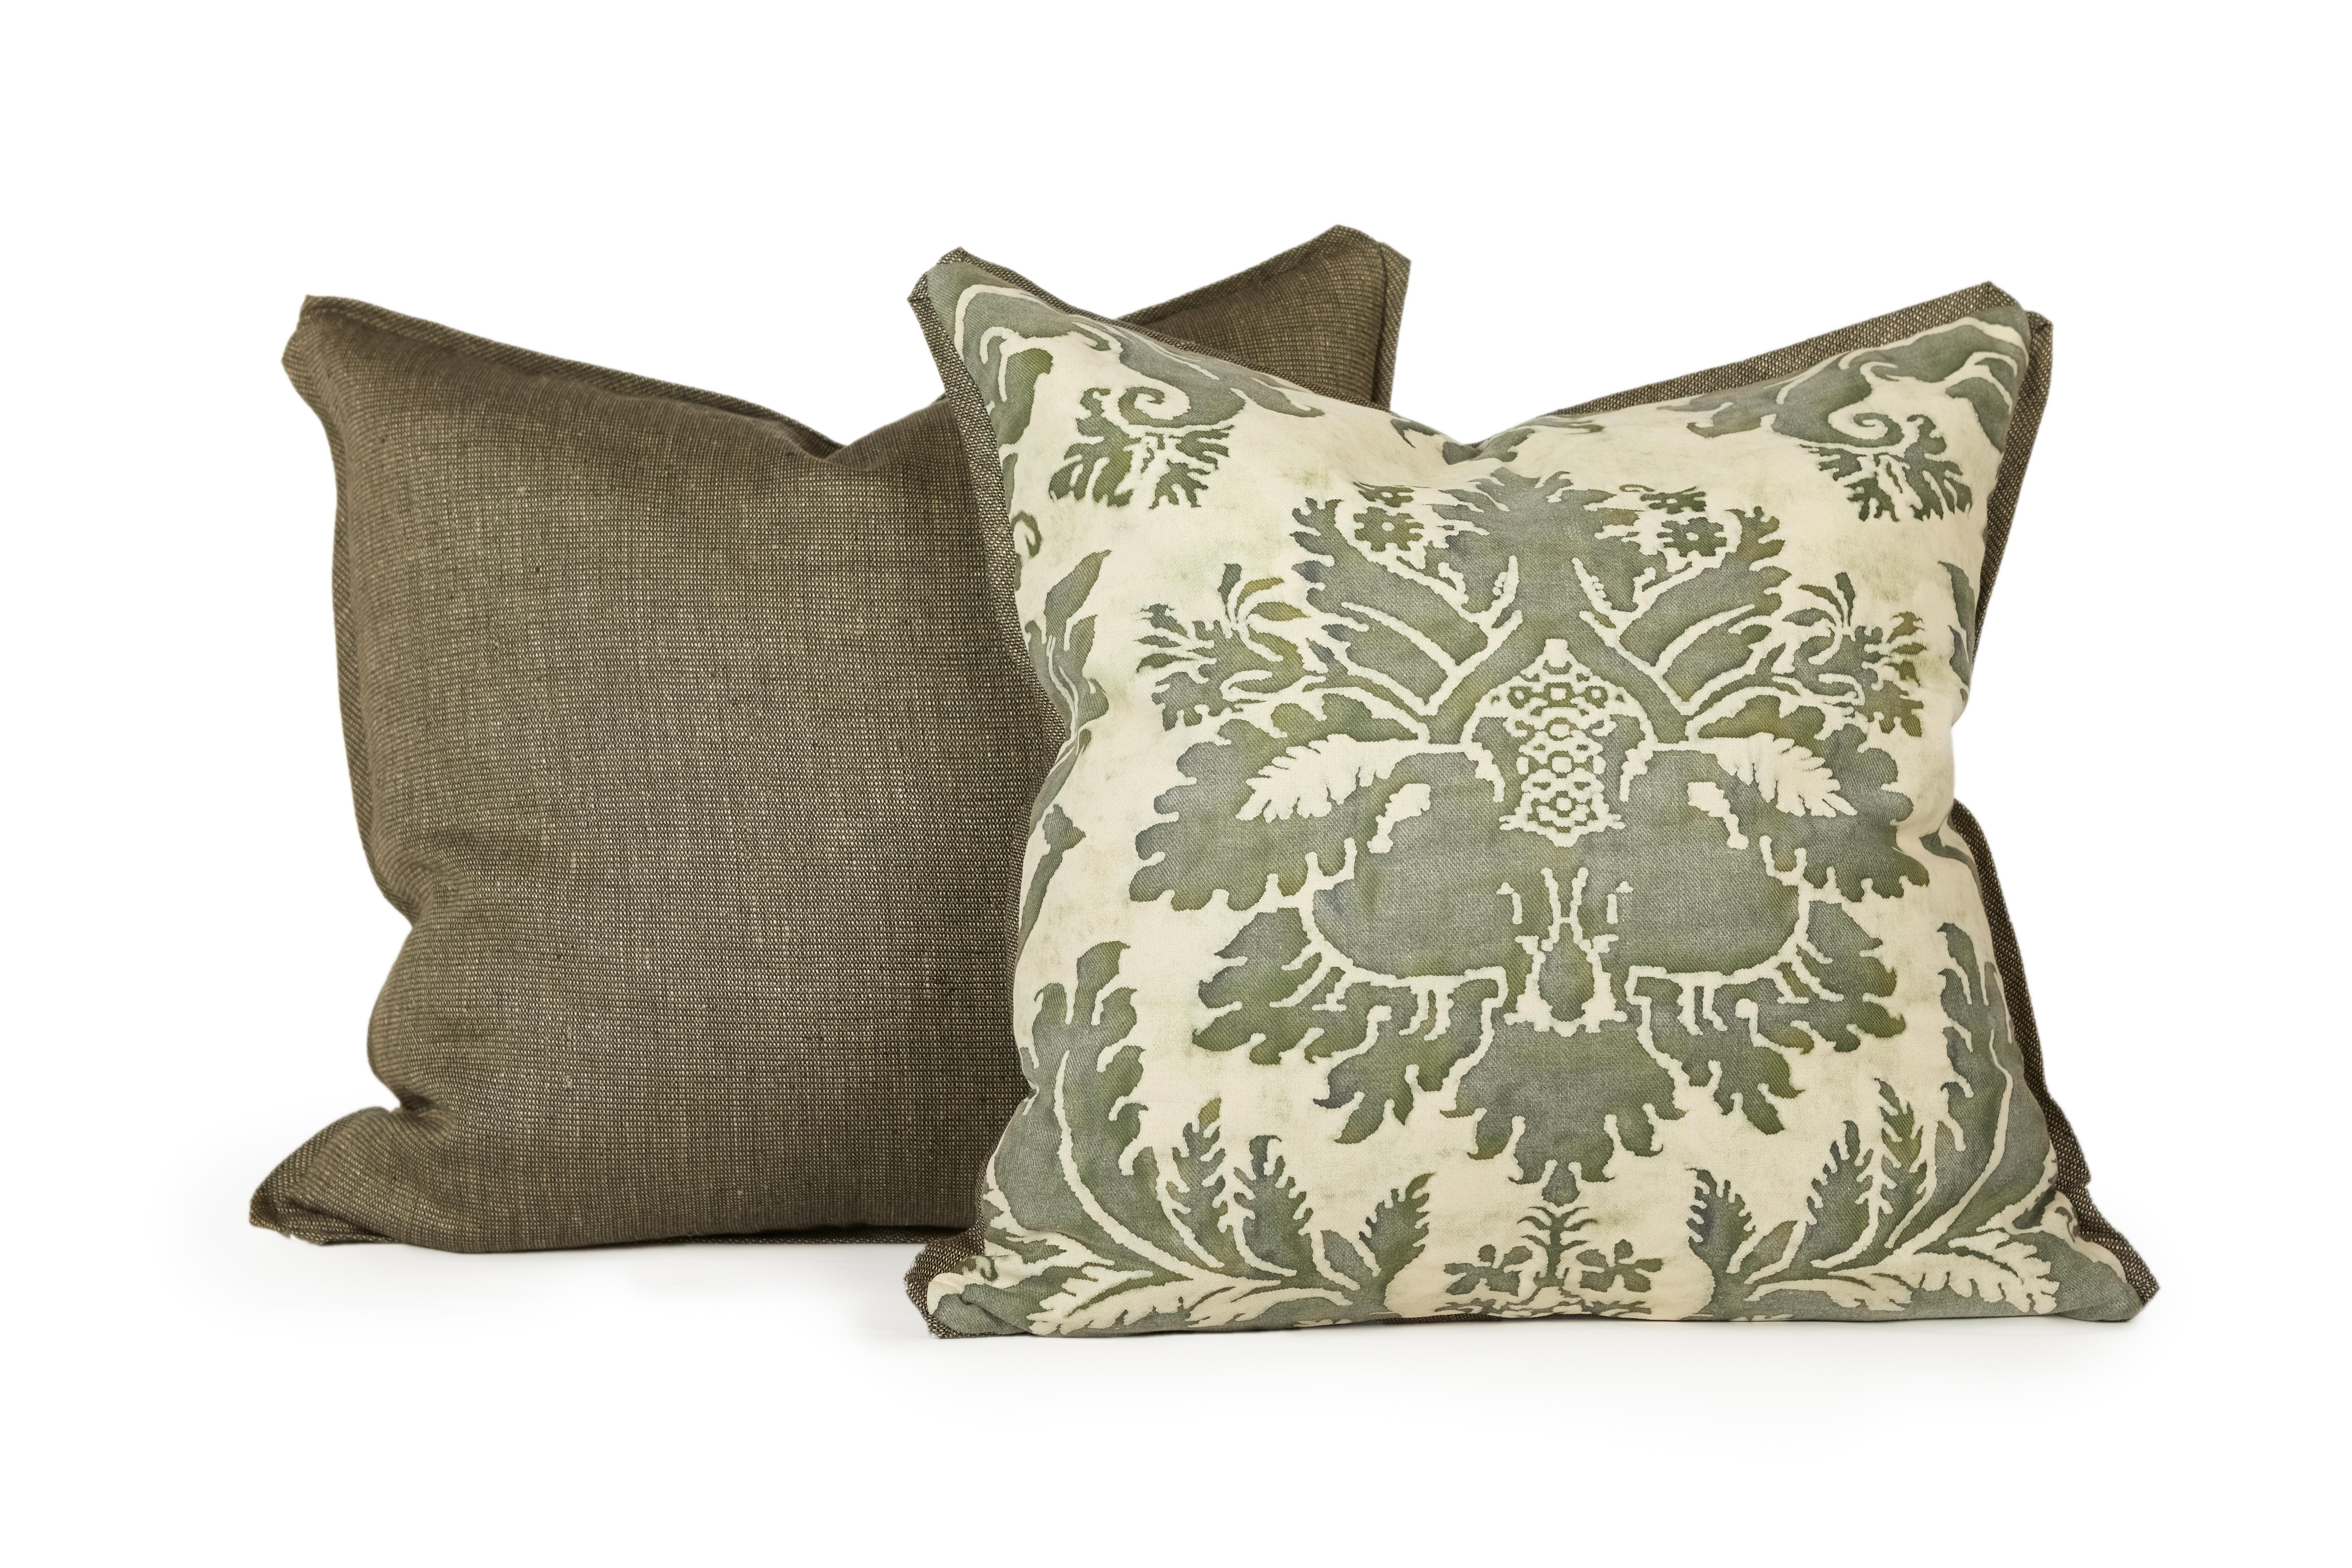 A beautiful pair of Fortuny fabric cushions in the Glicine pattern, with a pale green and olive green colorway. Cushions feature bias edging and matching dark green backing. The pattern is a 17th century Italian design with wisteria motif.

Newly